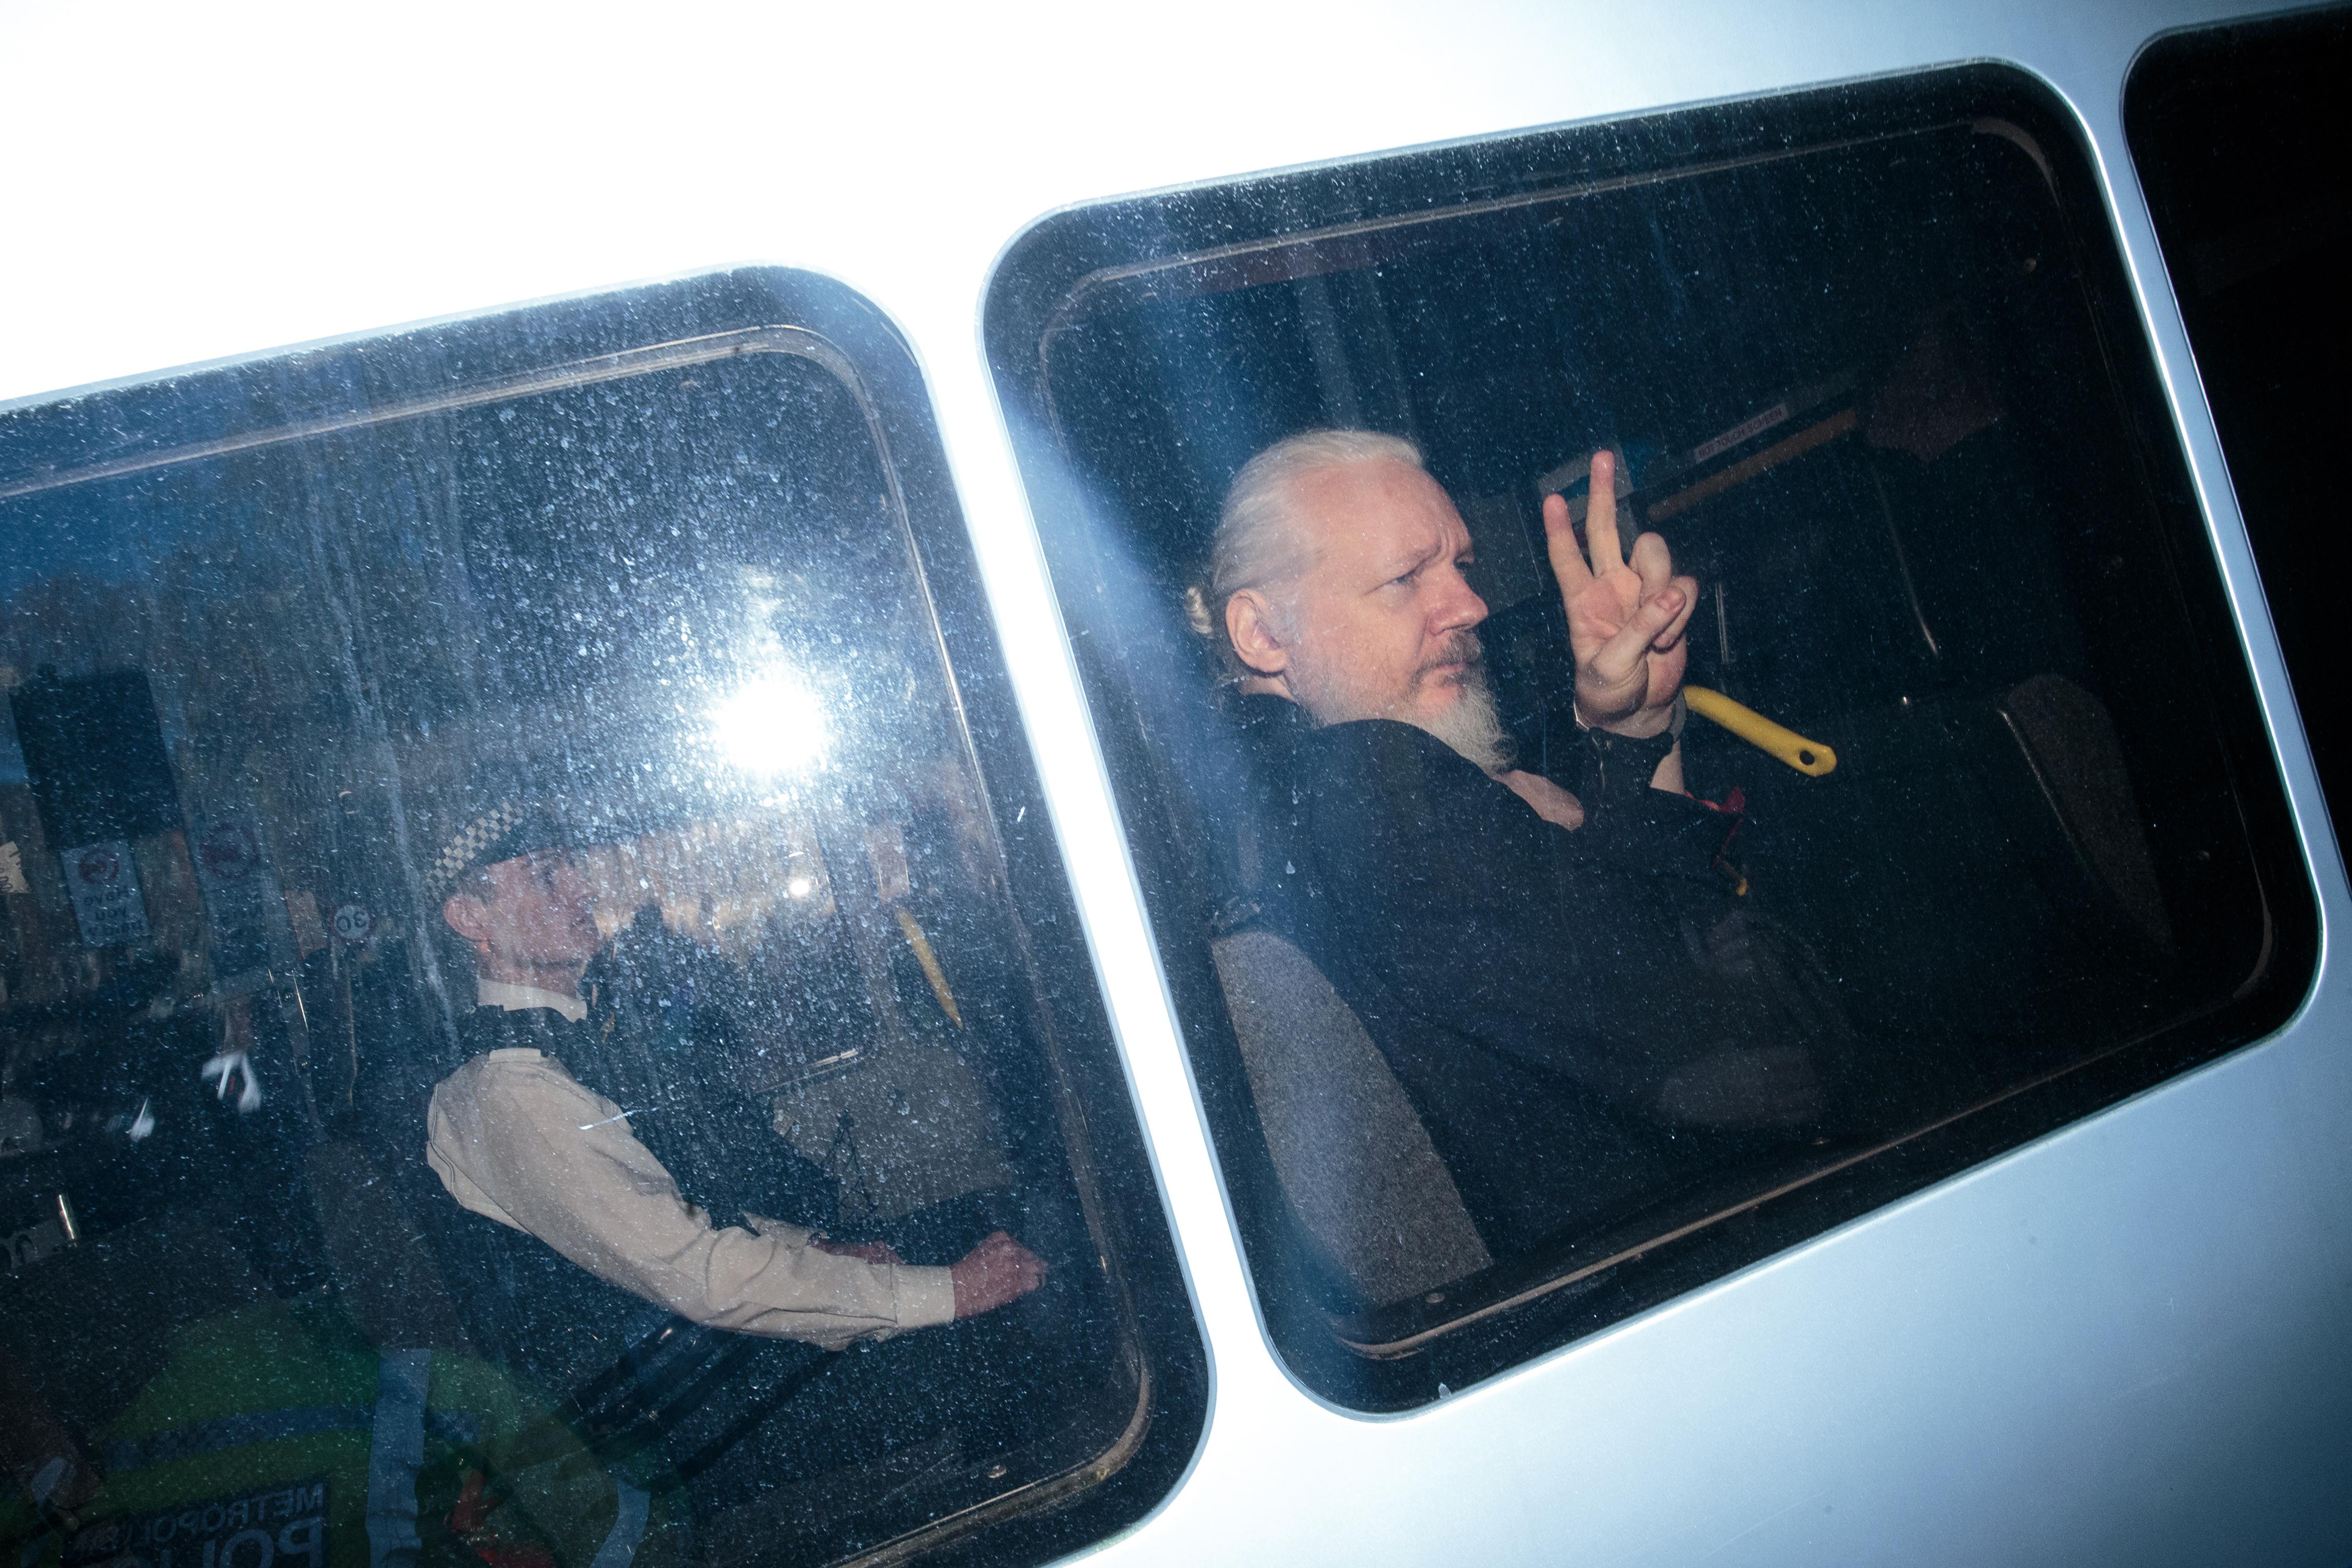 Julian Assange holds up a peace symbol as he is driven in a police vehicle in a grainy photo.